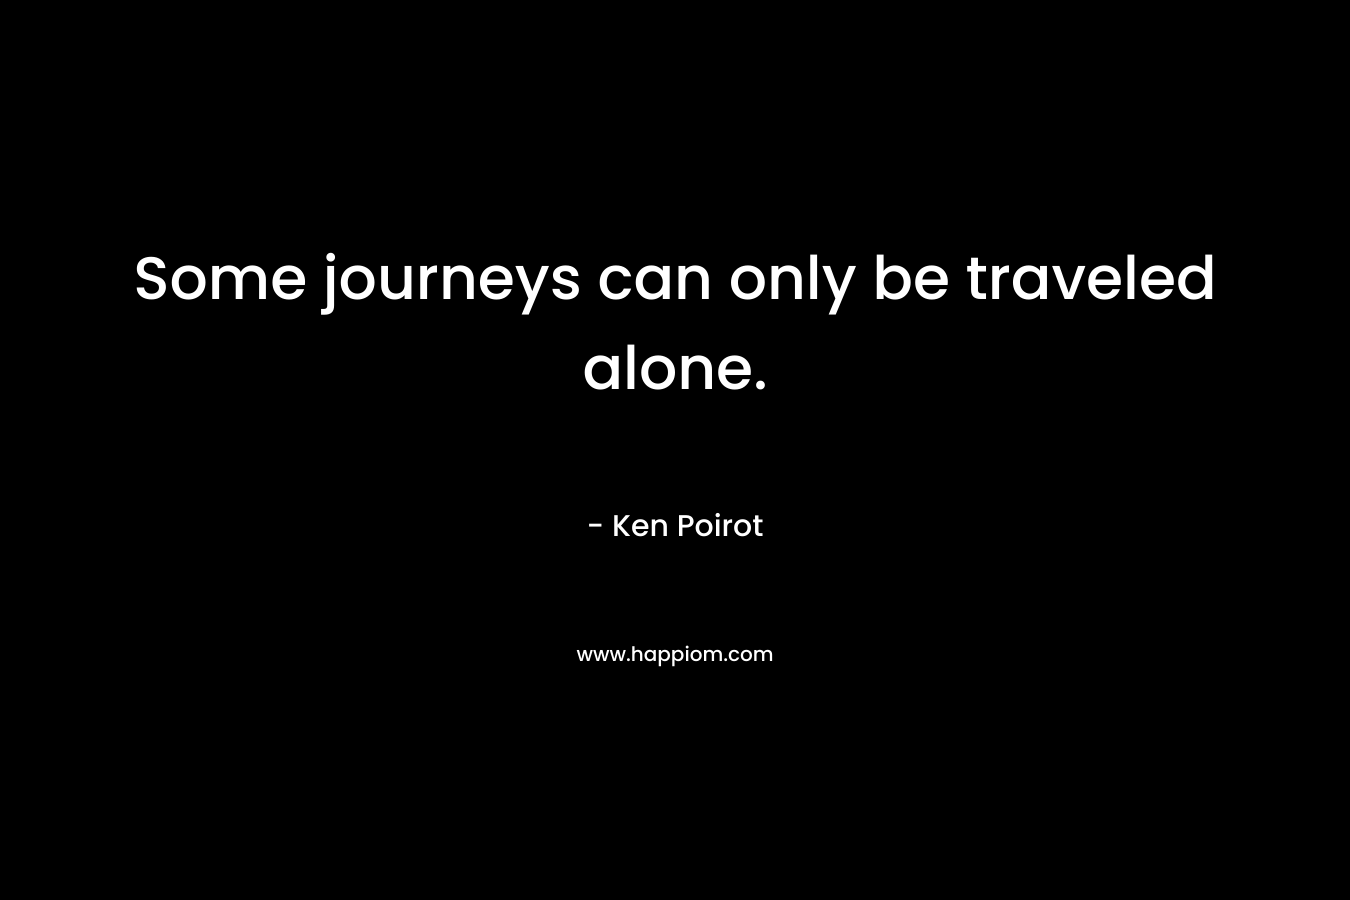 Some journeys can only be traveled alone.